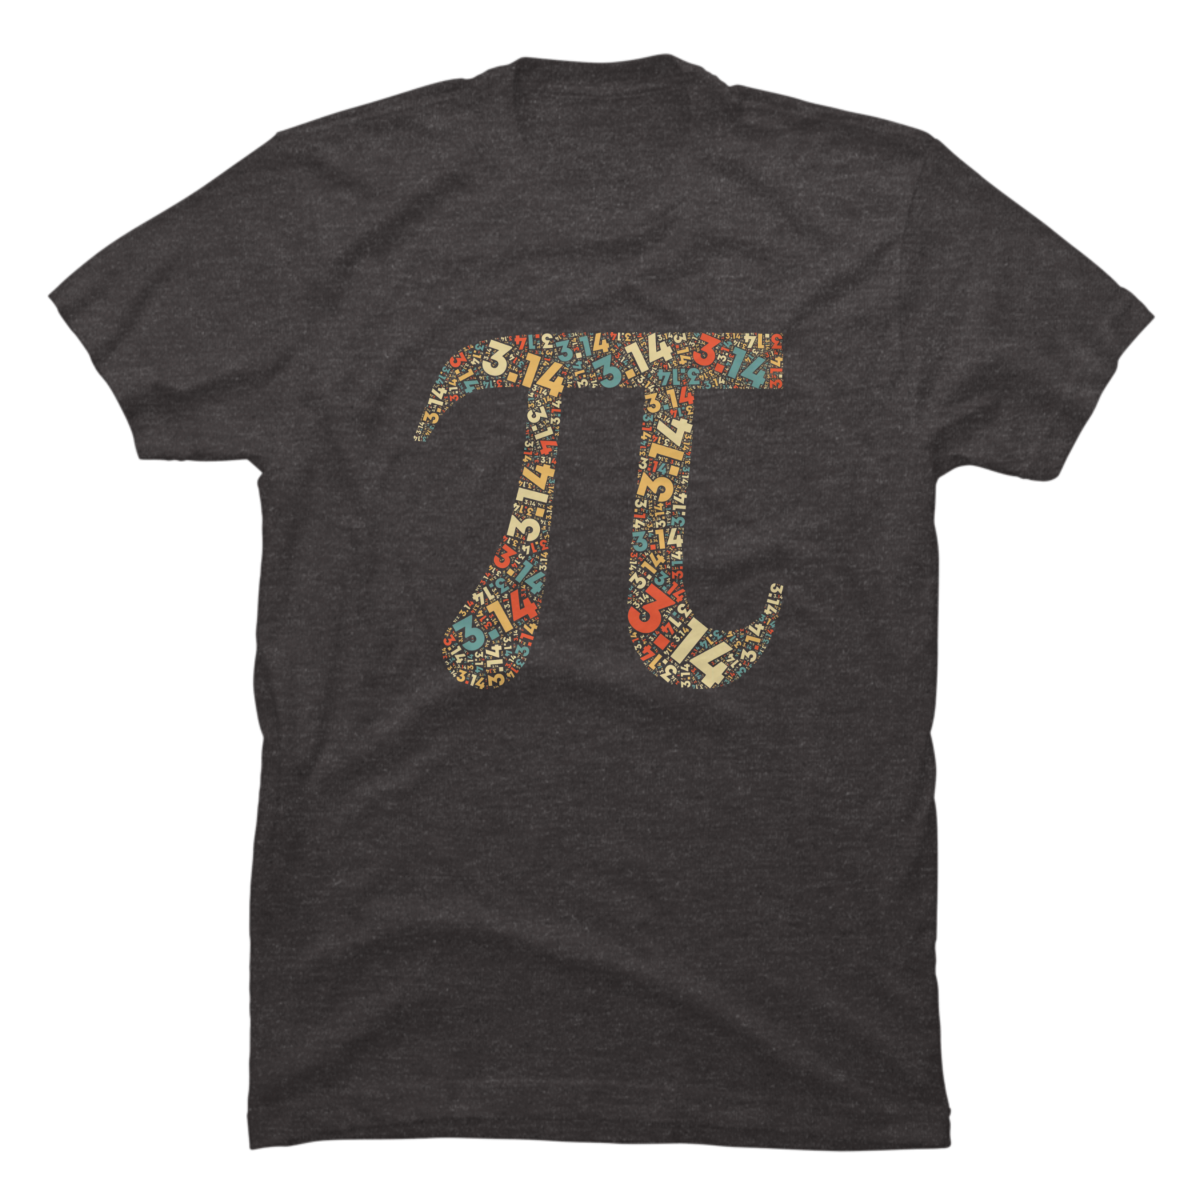 Numbers of Pi | Shirt Design by Jeff Desmond on Dribbble